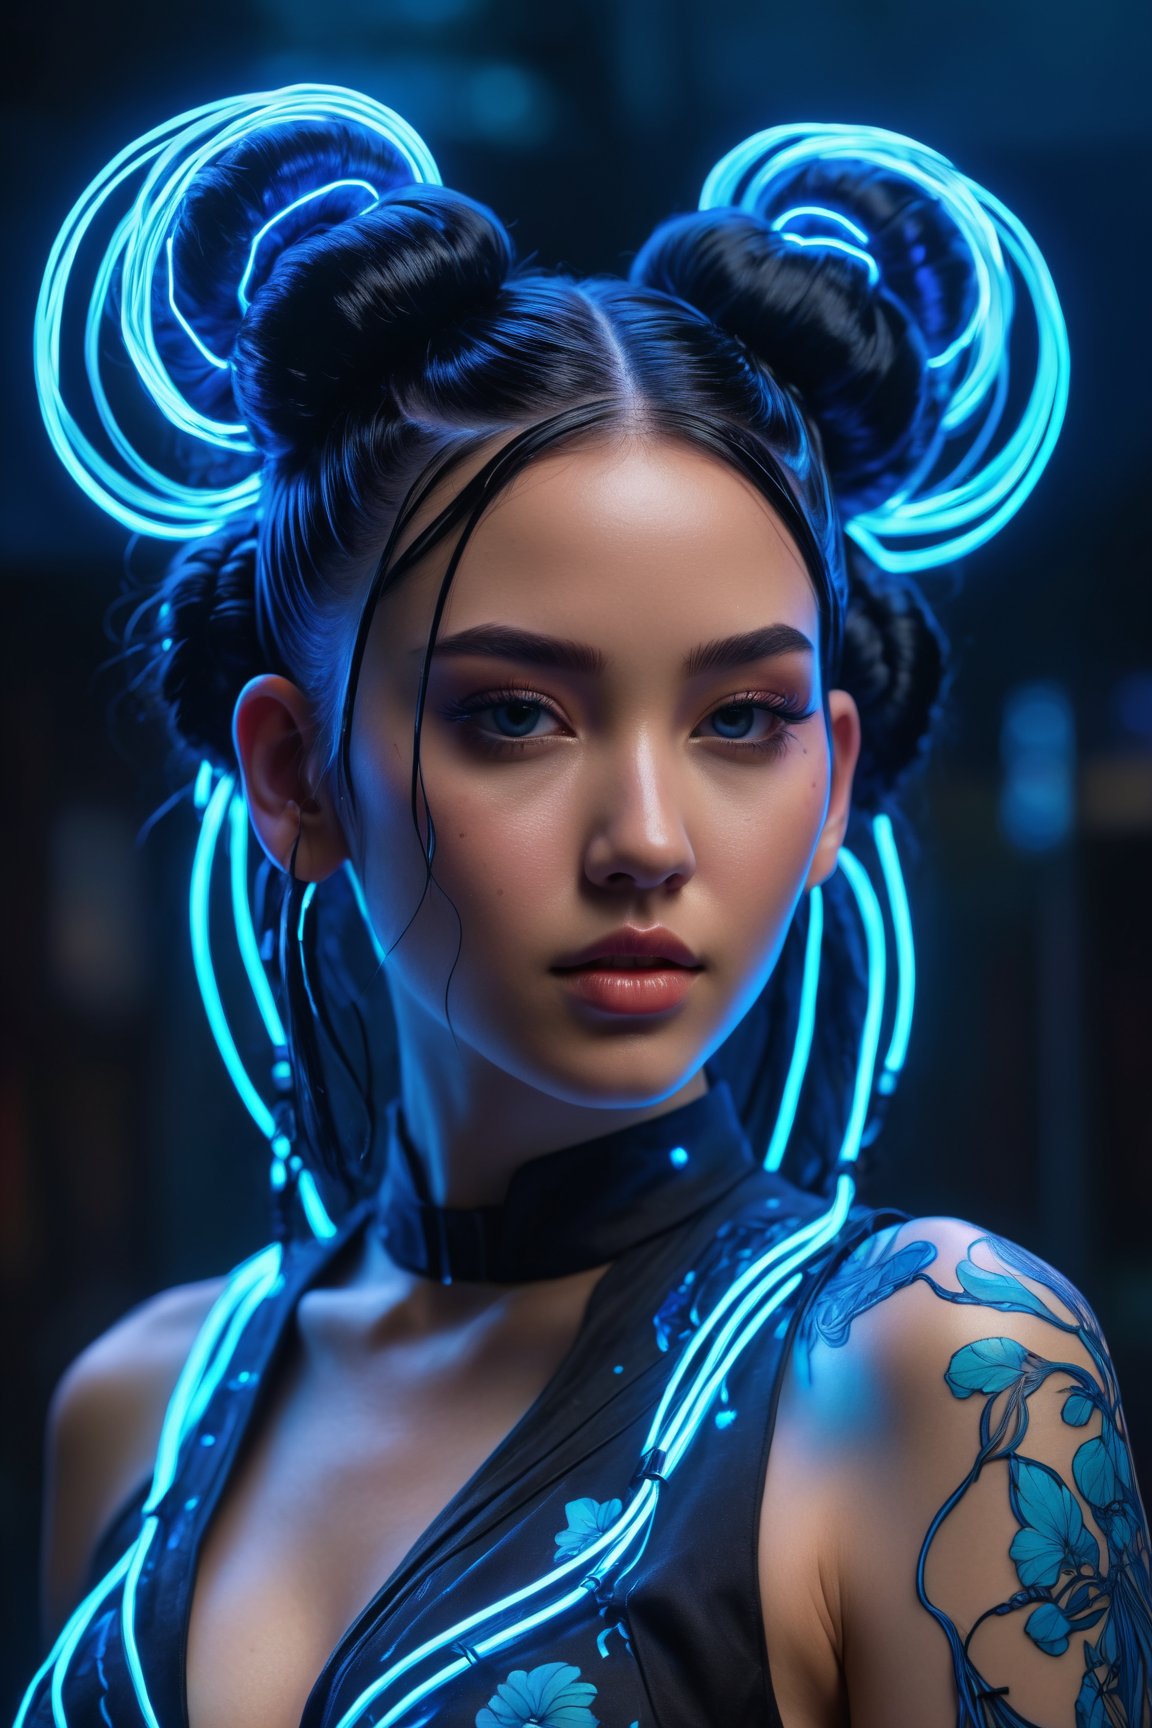 (best quality, 8K, highres, masterpiece), ultra-detailed, cyberpunk woman adorned with long black hair fashioned into space buns. In this ethereal scene, she embodies the role of the goddess of horticulture, surrounded by millions of microscopic, ultra-bright blue neon strings emanating from her form. composition showcases a stunningly beautiful backlit silhouette, intricately detailed and adorned with neon clouds, creating a mesmerizing and vivid blue color palette.